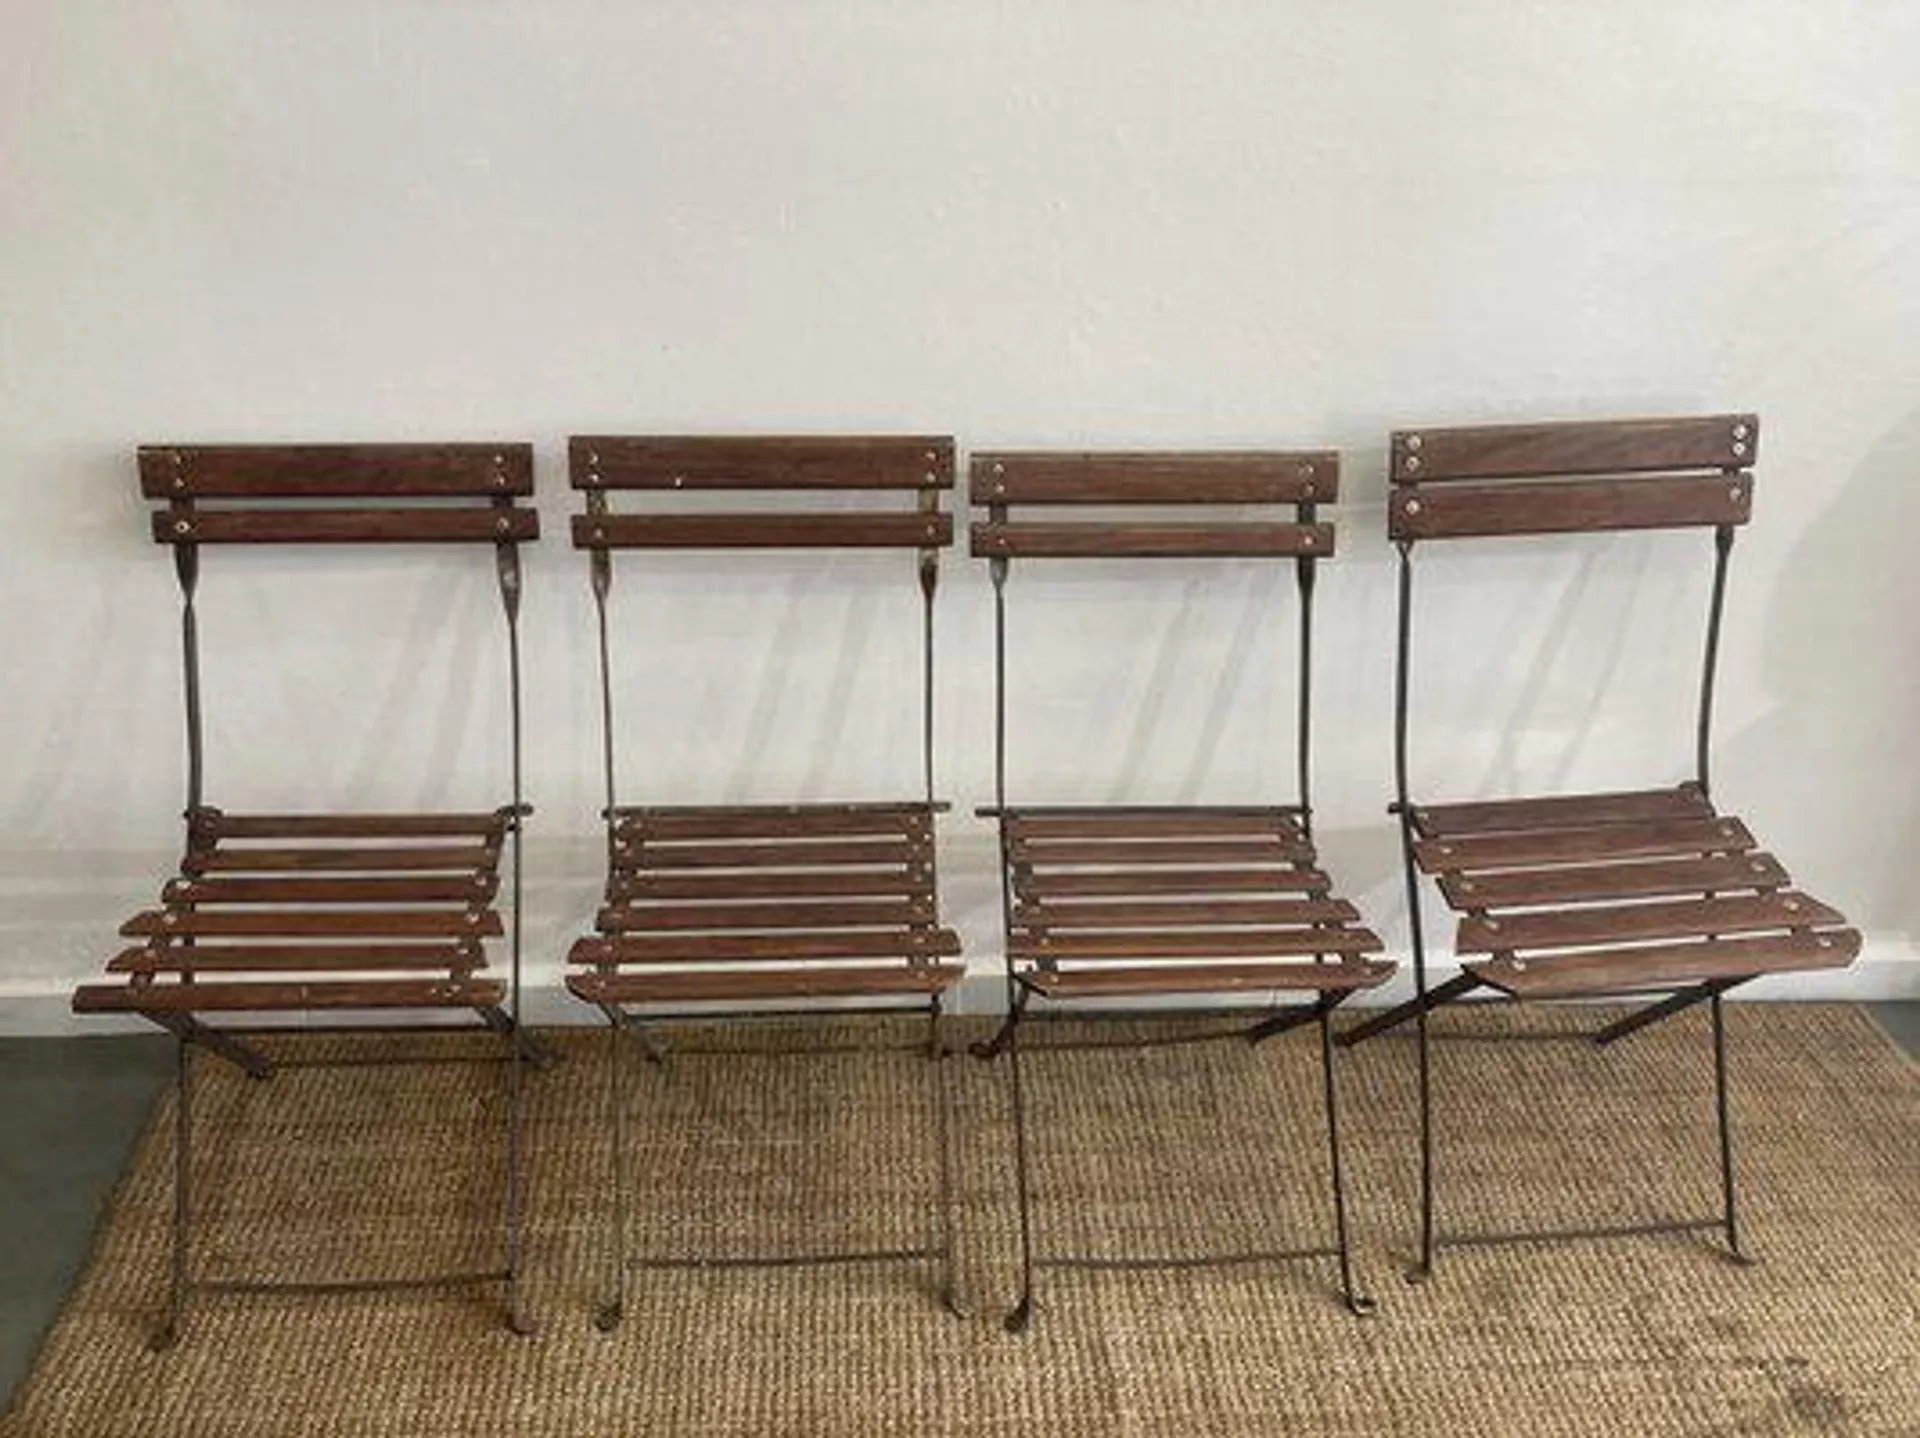 Vintage French Garden Chairs in Iron and Wood, Set of 4